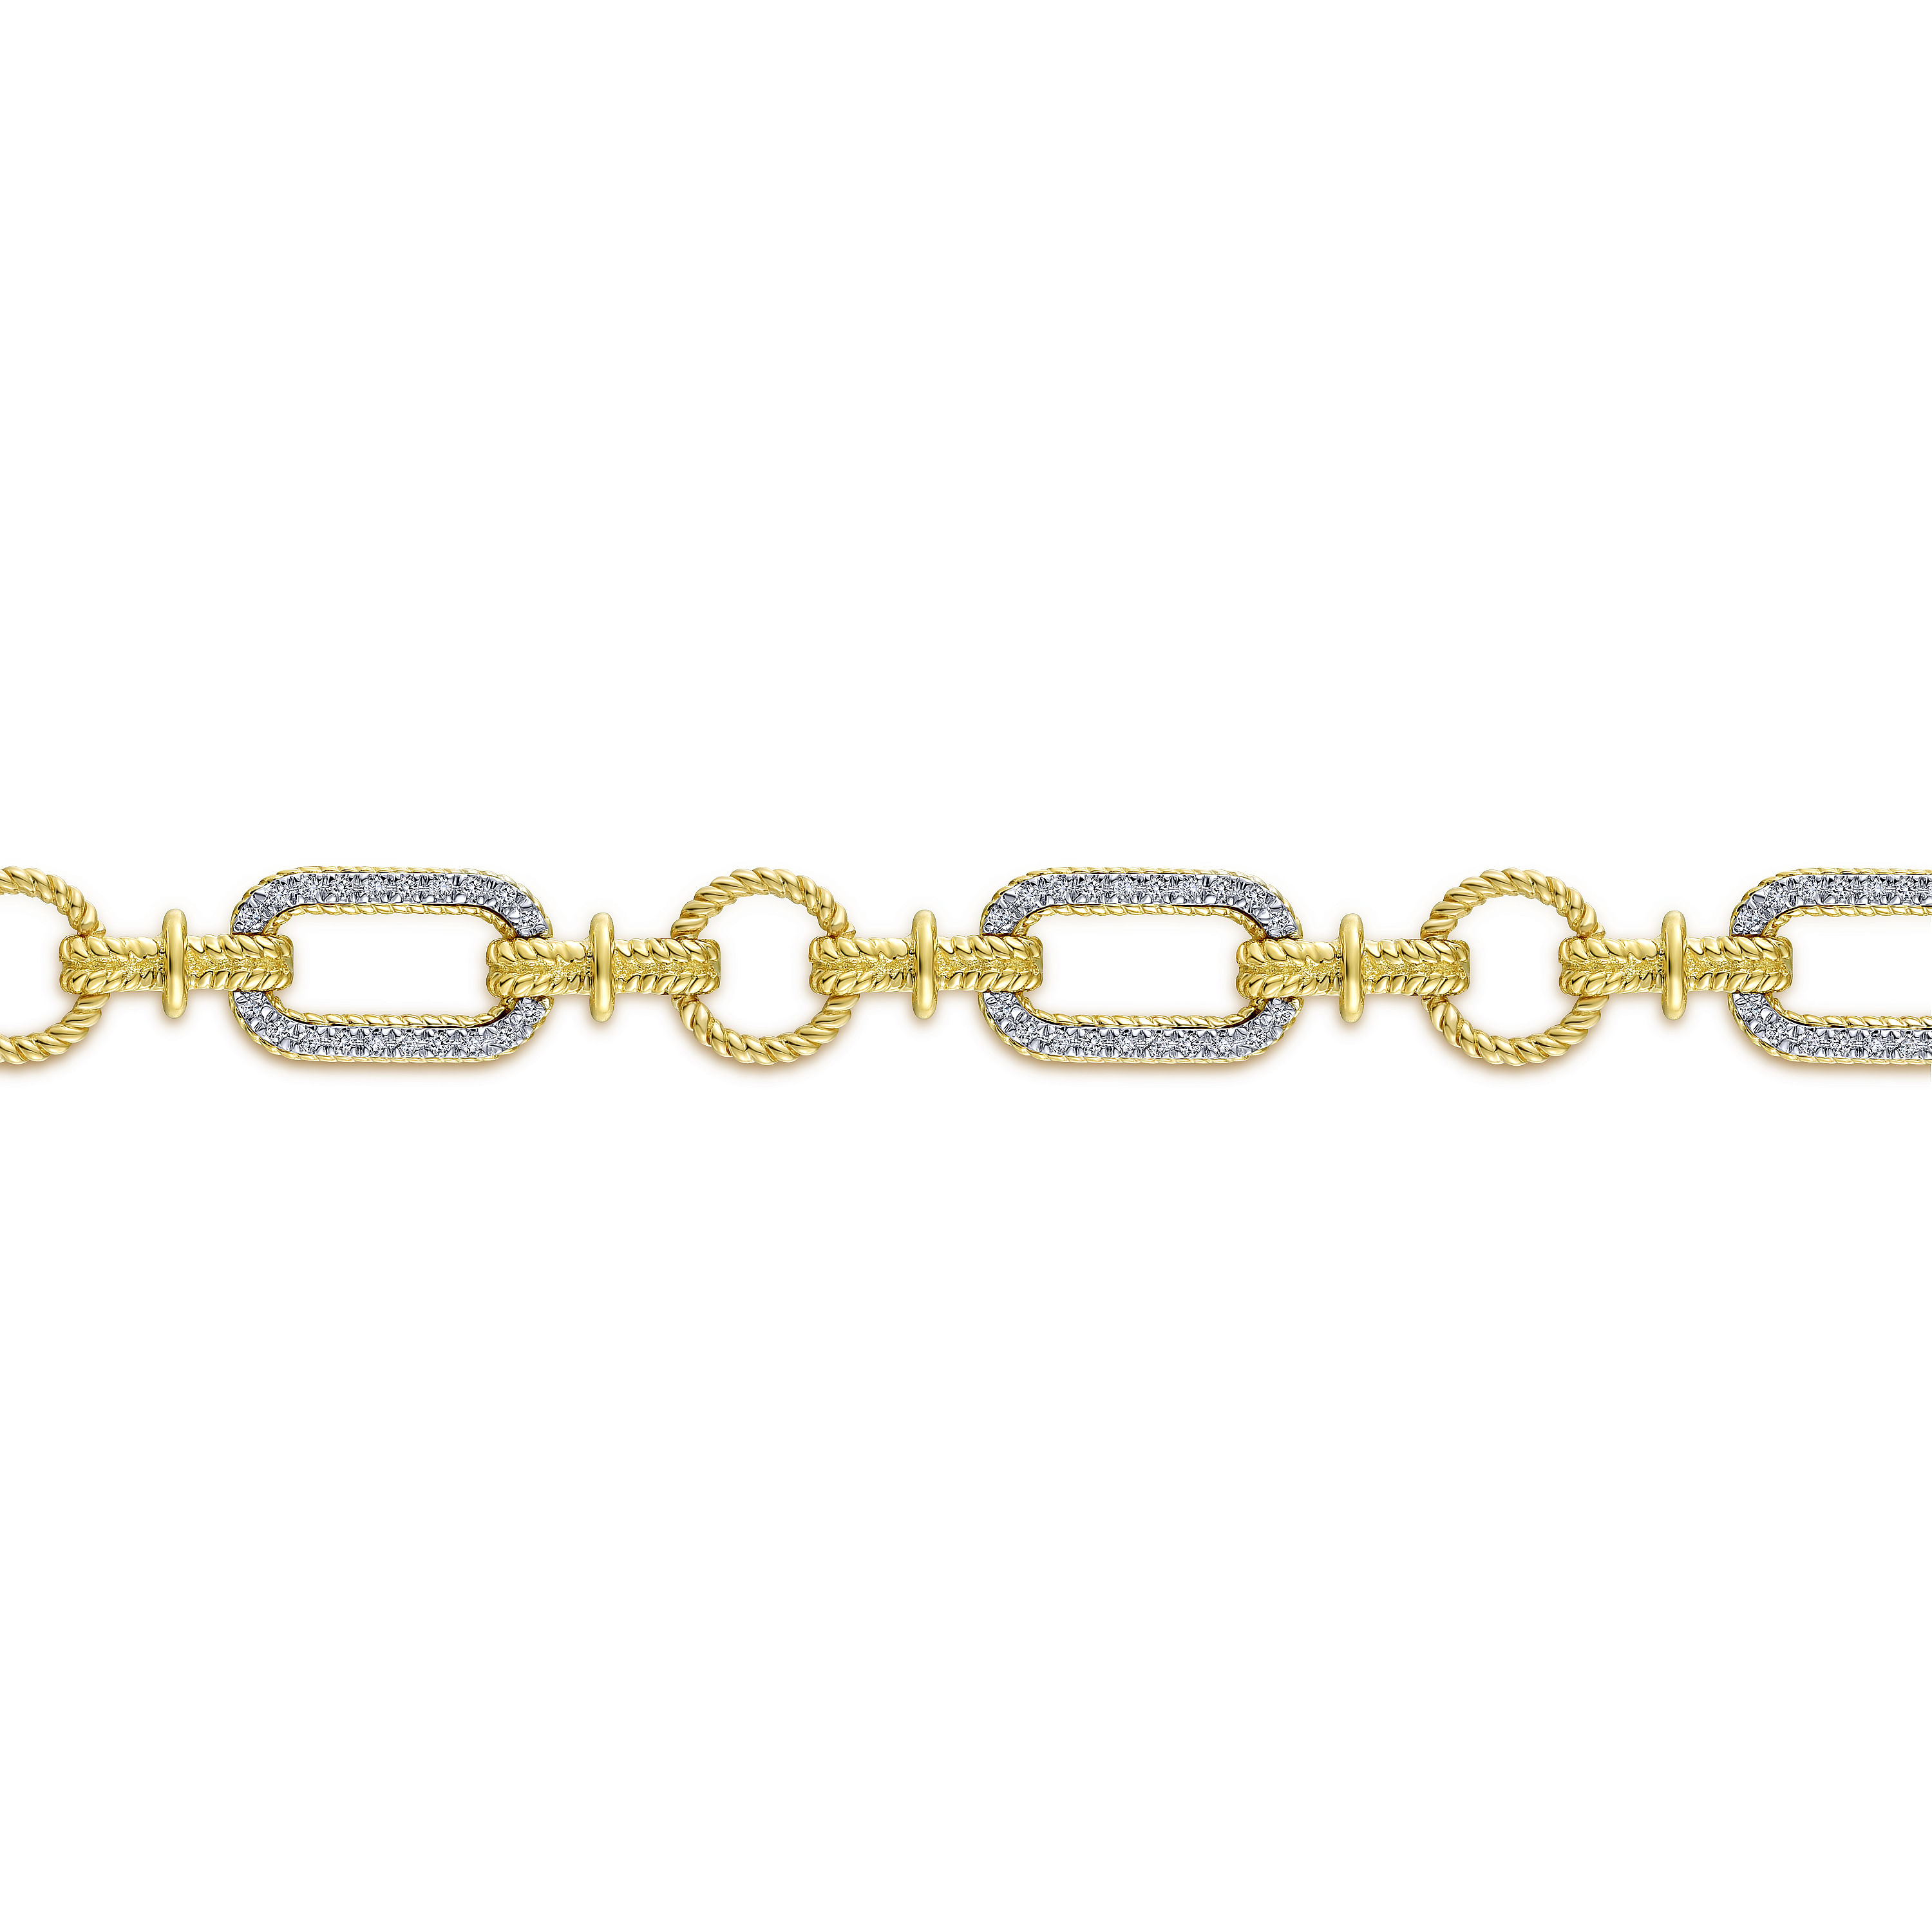 14K-Yellow-and-White-Gold-Diamond-Bracelet-with-Alternating-Links2